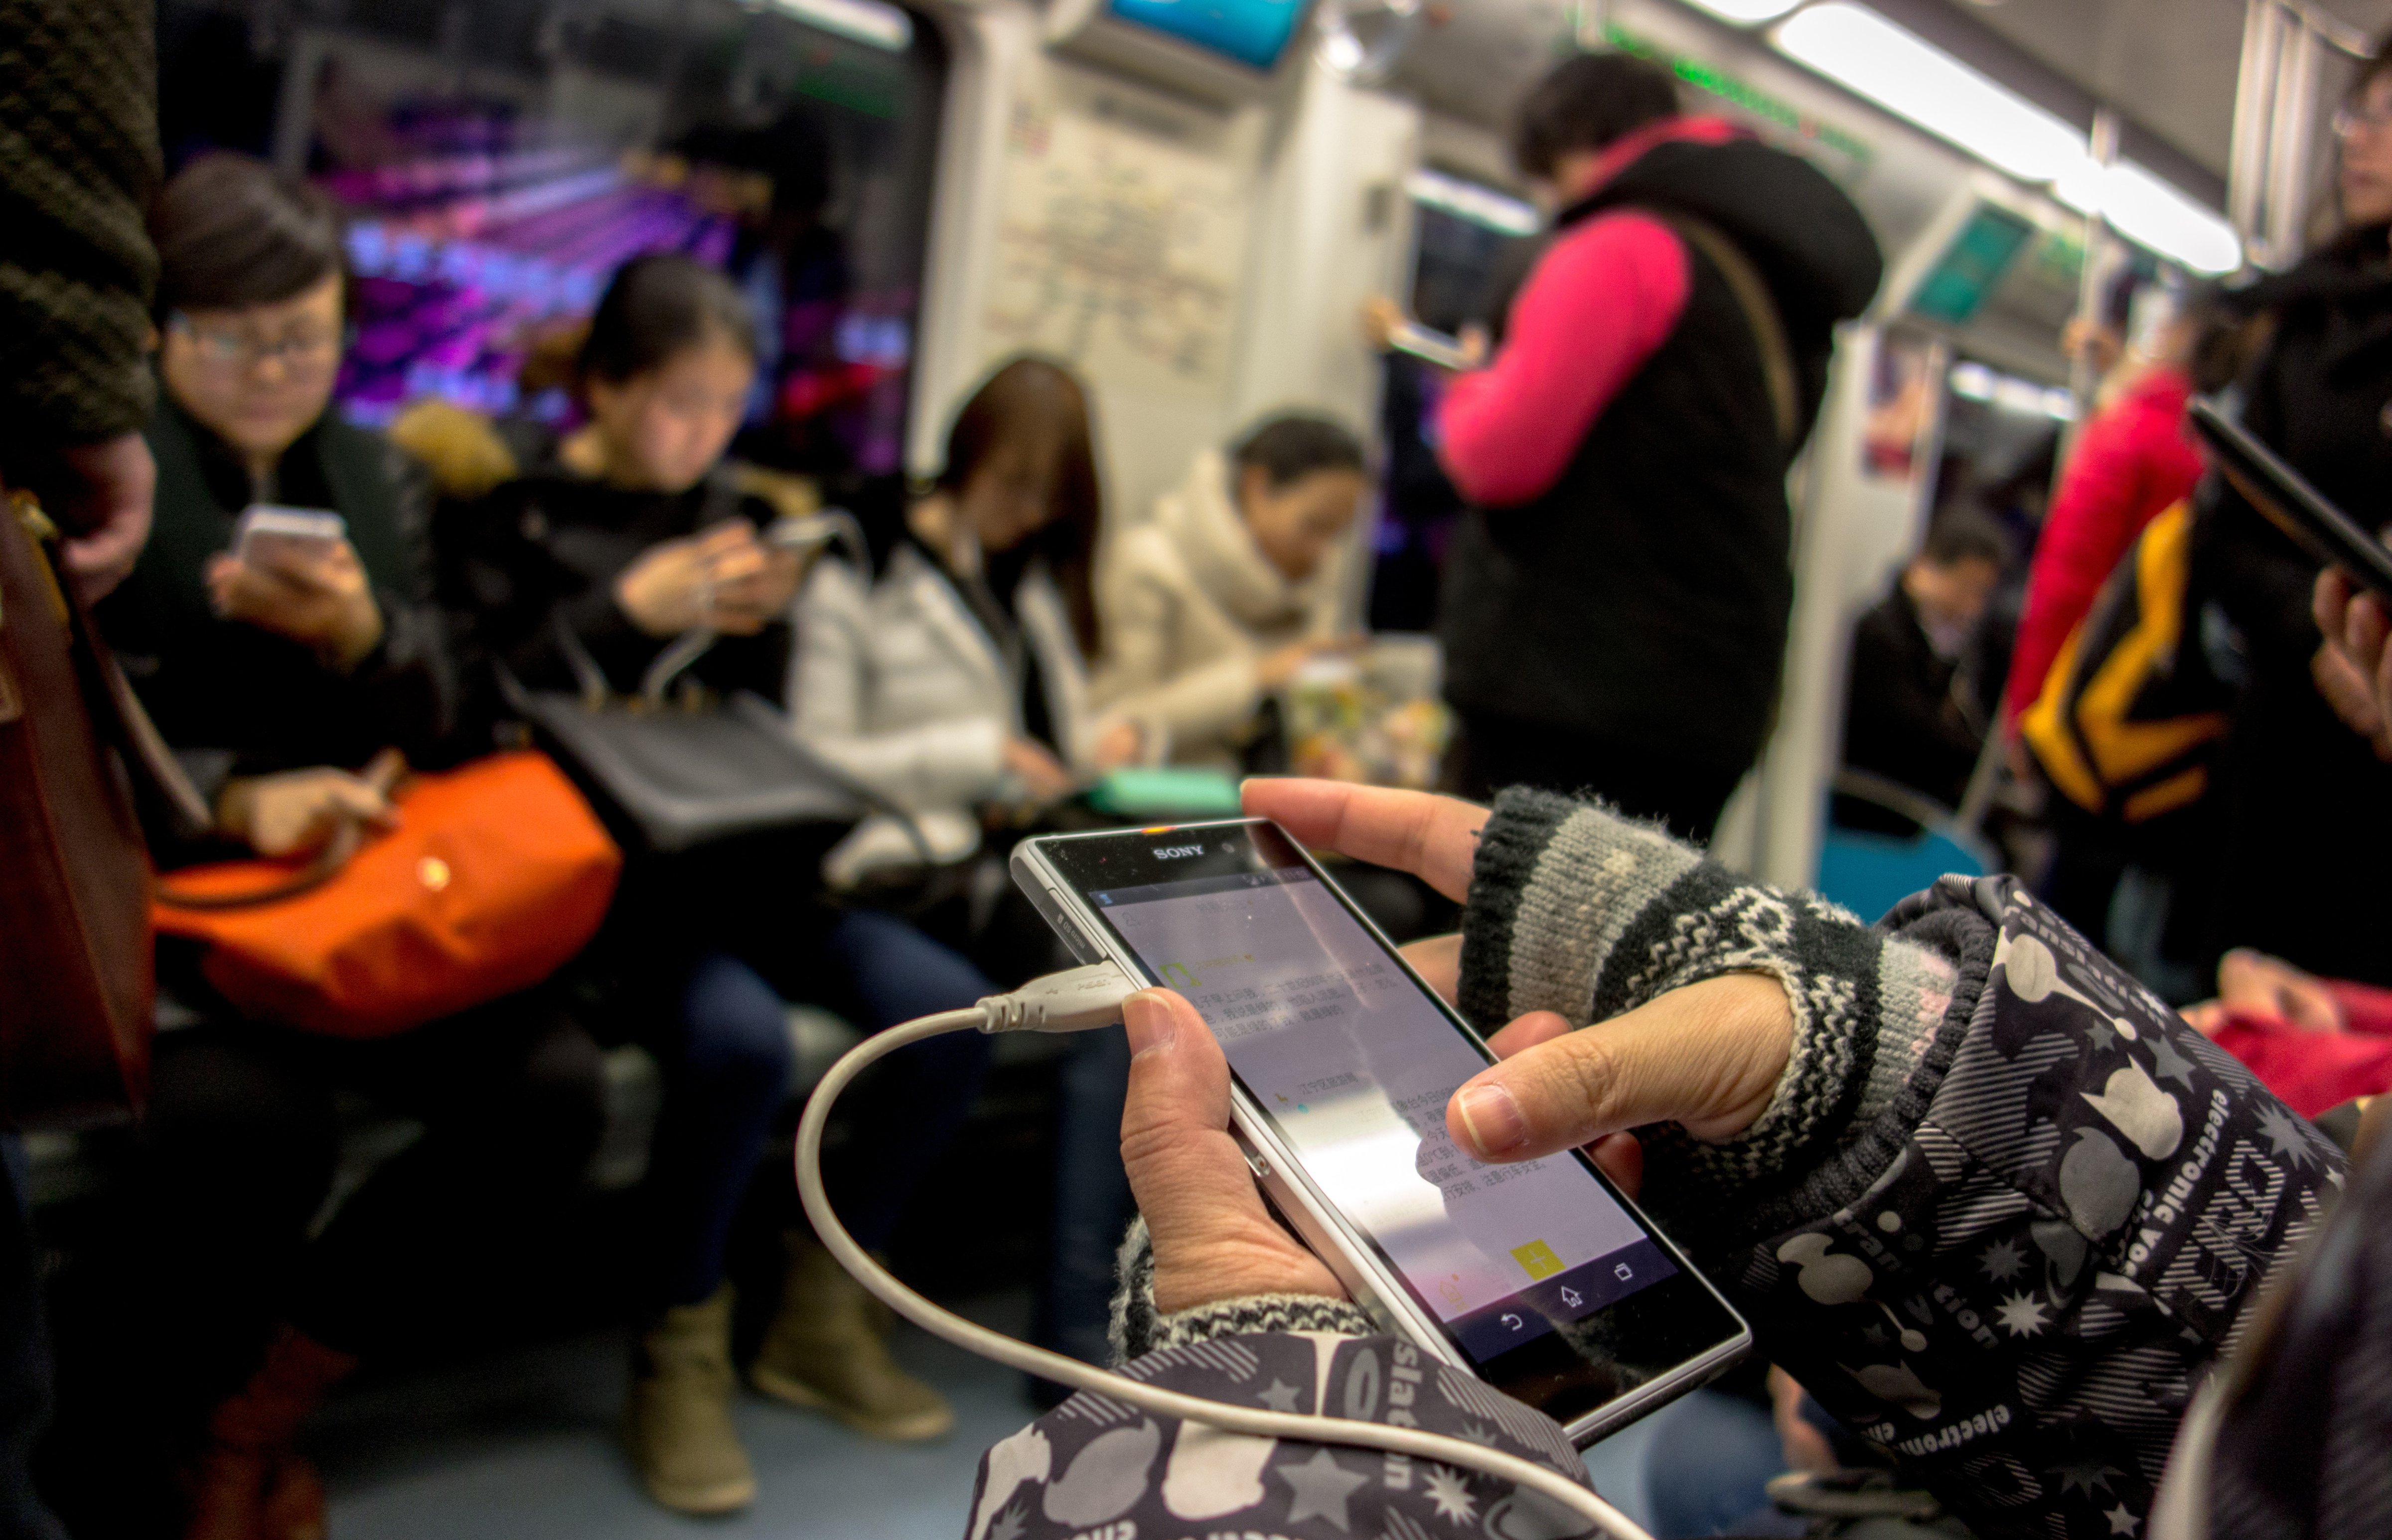 Passengers read news or watch videos on their smart phones in the subway on Jan. 28, 2015. (Zhang Peng—LightRocket/Getty Images)